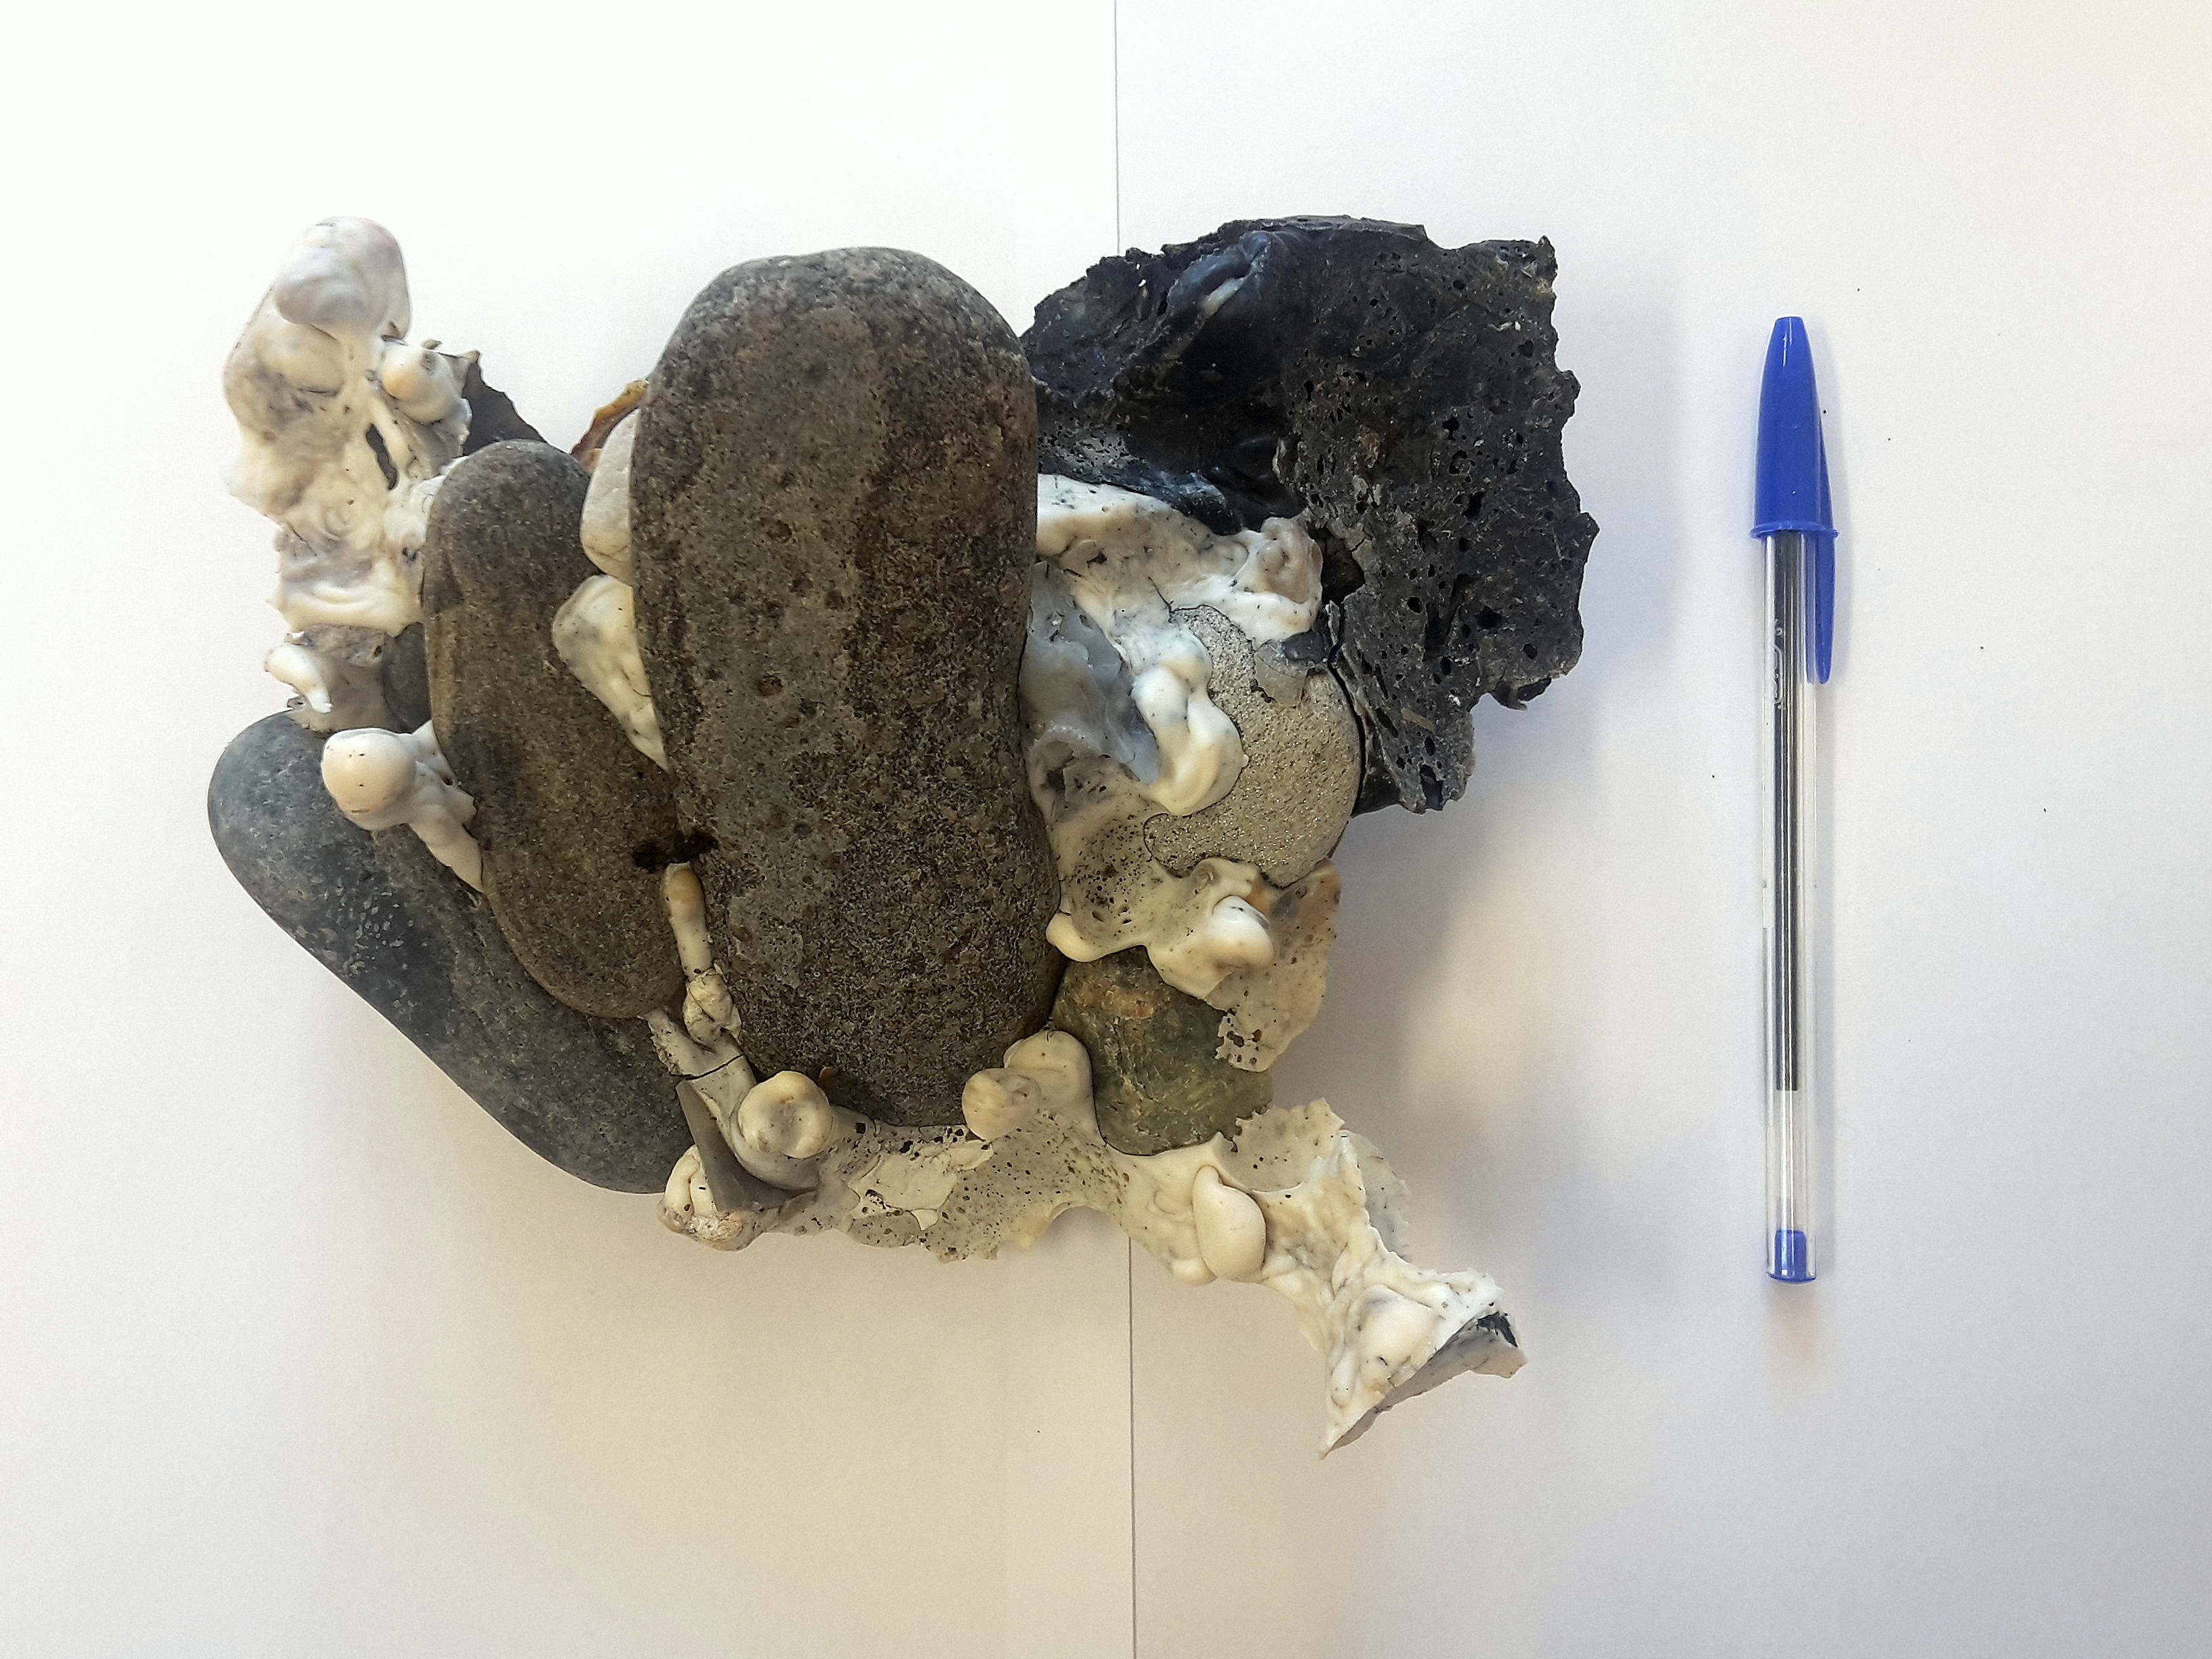 Plastiglomerates: Much of the material Pétursdóttir analyses cannot be traced to a specific place or culture. It has, moreover, been thoroughly transformed and removed from its initial function. Here, Pétursdóttir has photographed a 'plastiglomerate'—natural materials held together by plastic. Photograph: Þóra Pétursdóttir